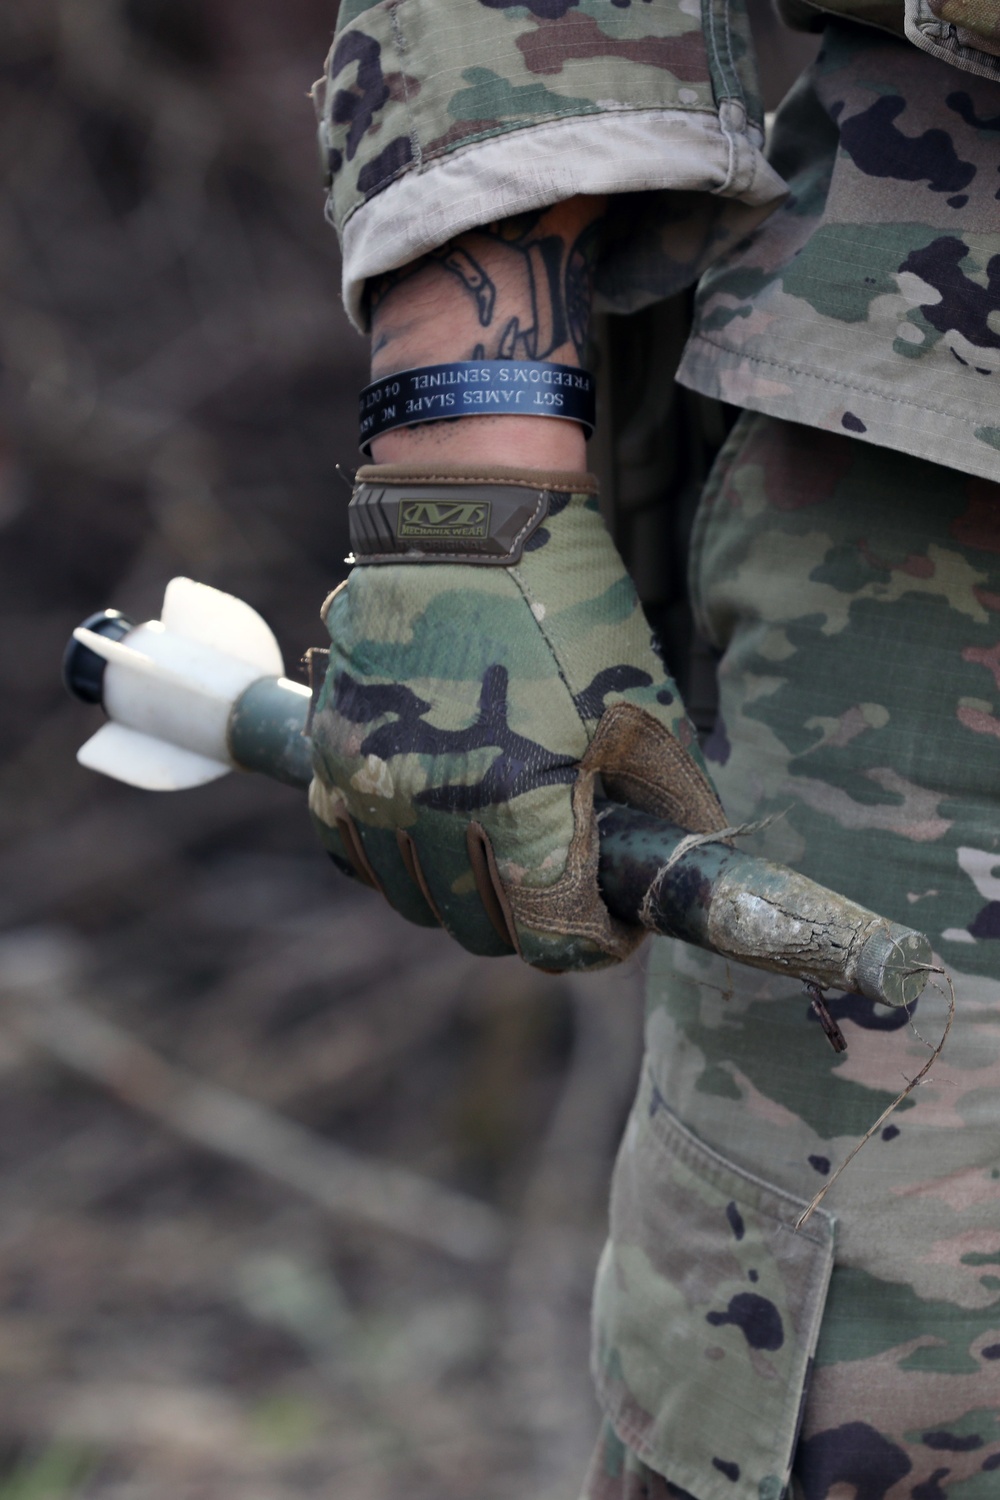 KFOR RC-E EOD responds to UXO reports in northern Kosovo